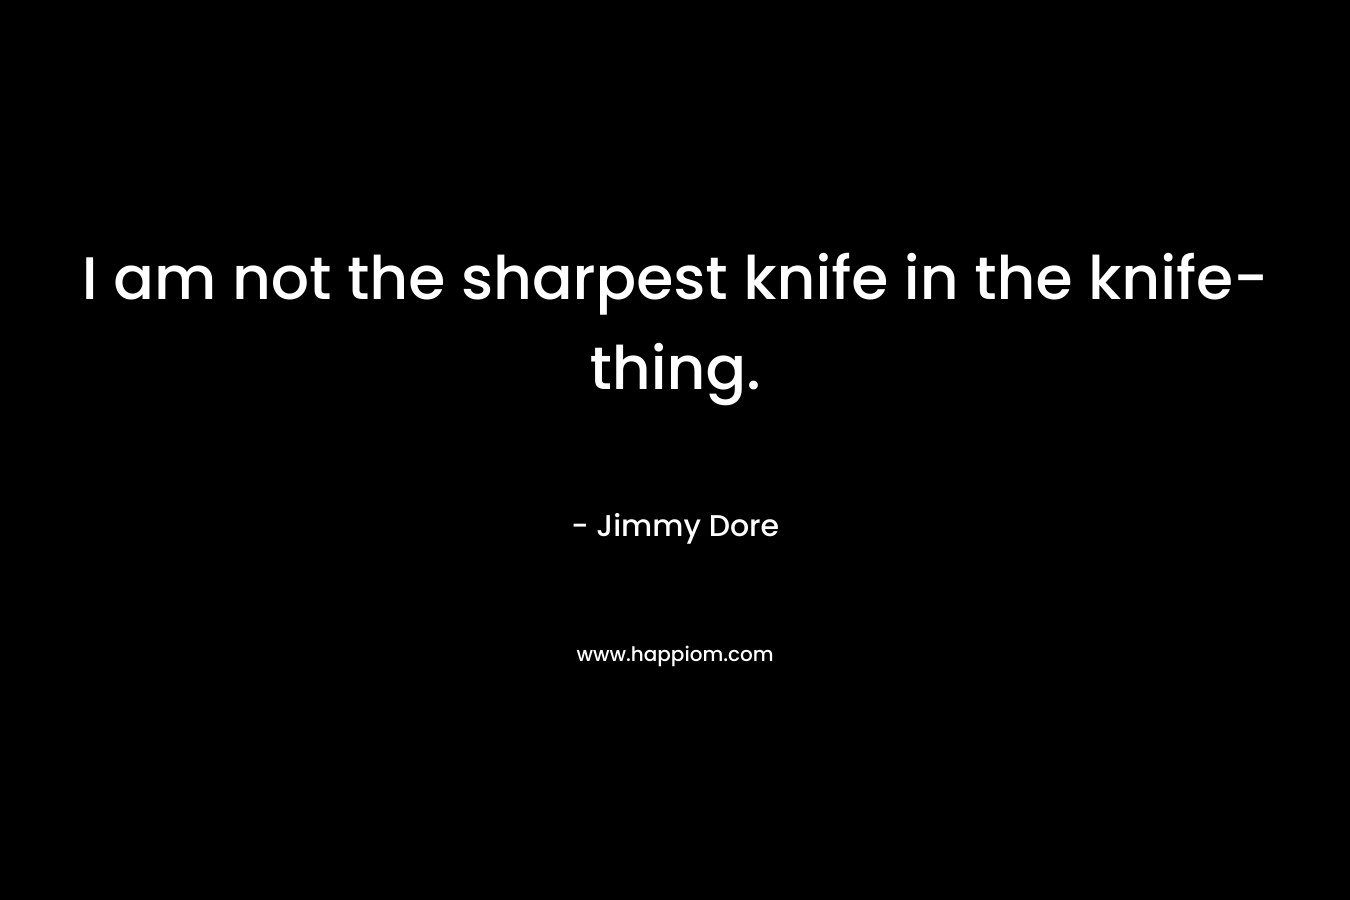 I am not the sharpest knife in the knife-thing. – Jimmy Dore